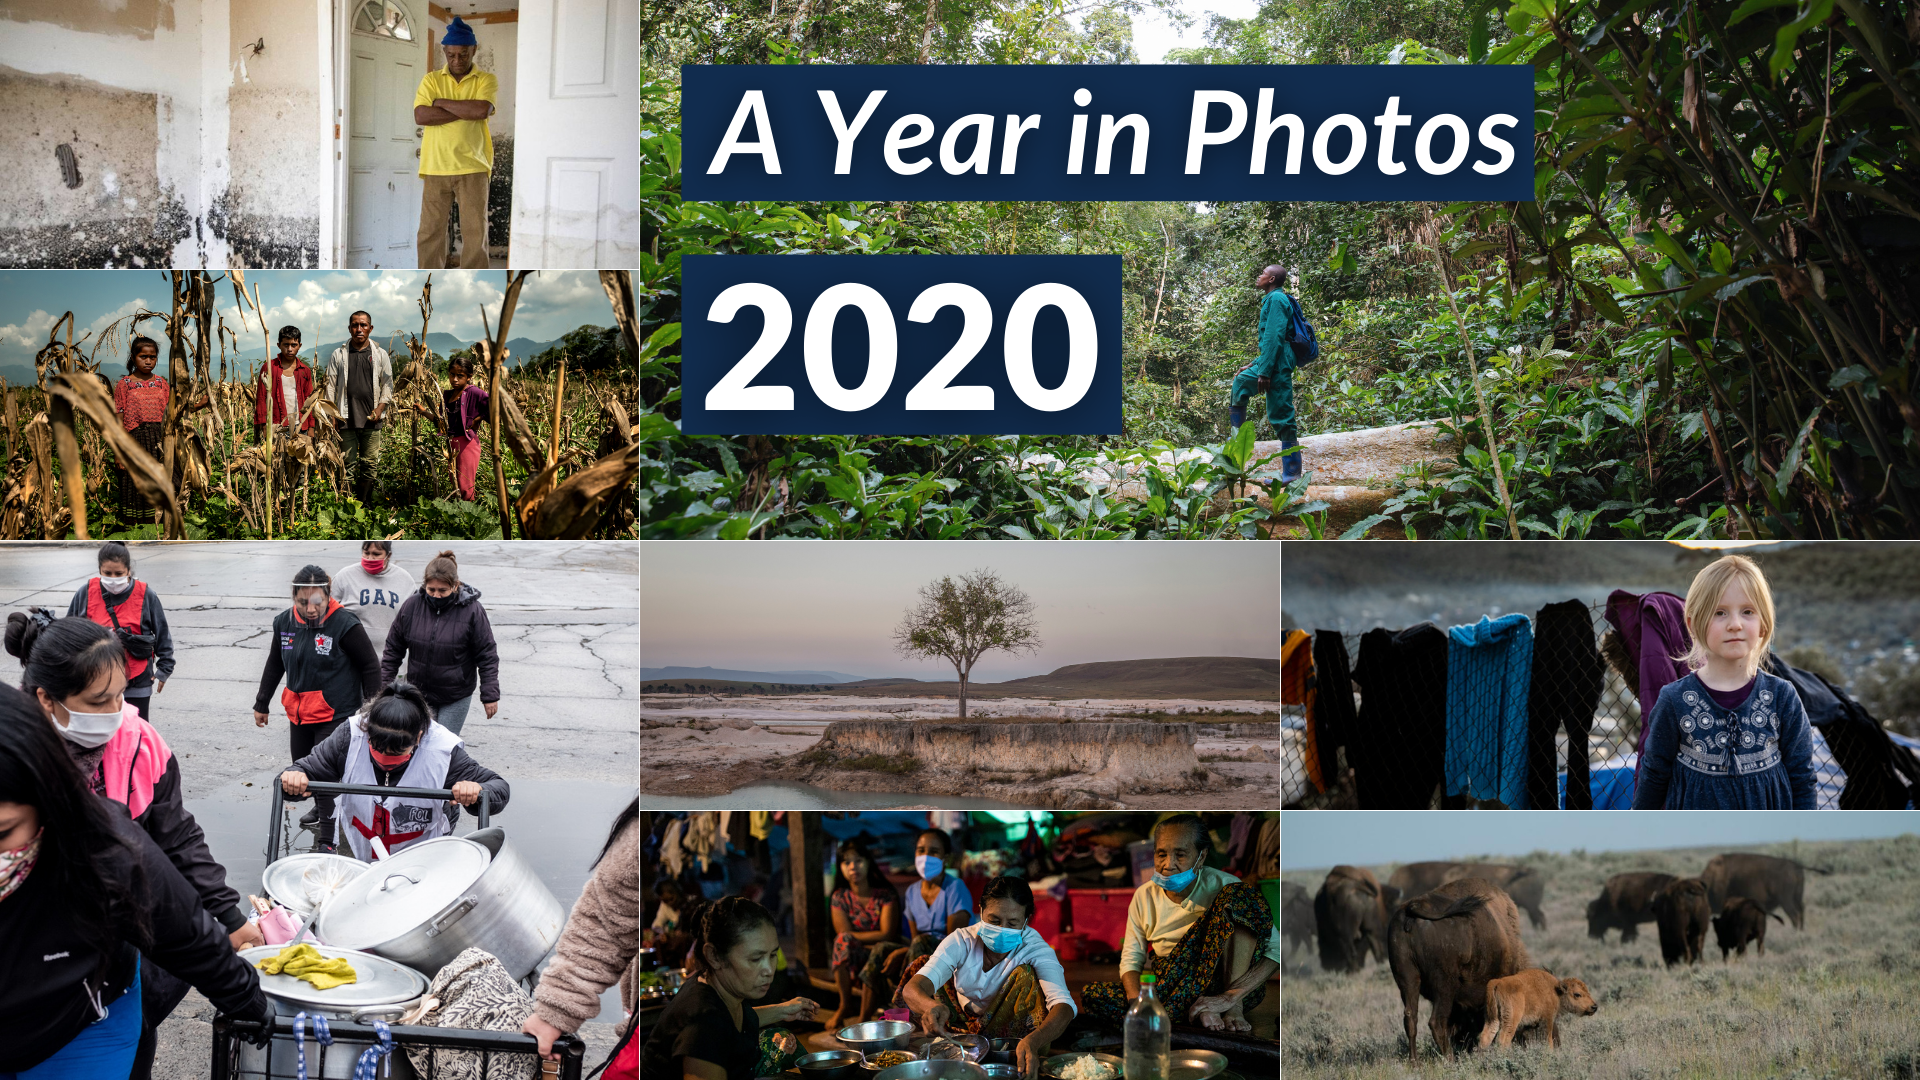 2020: A Year in Photos